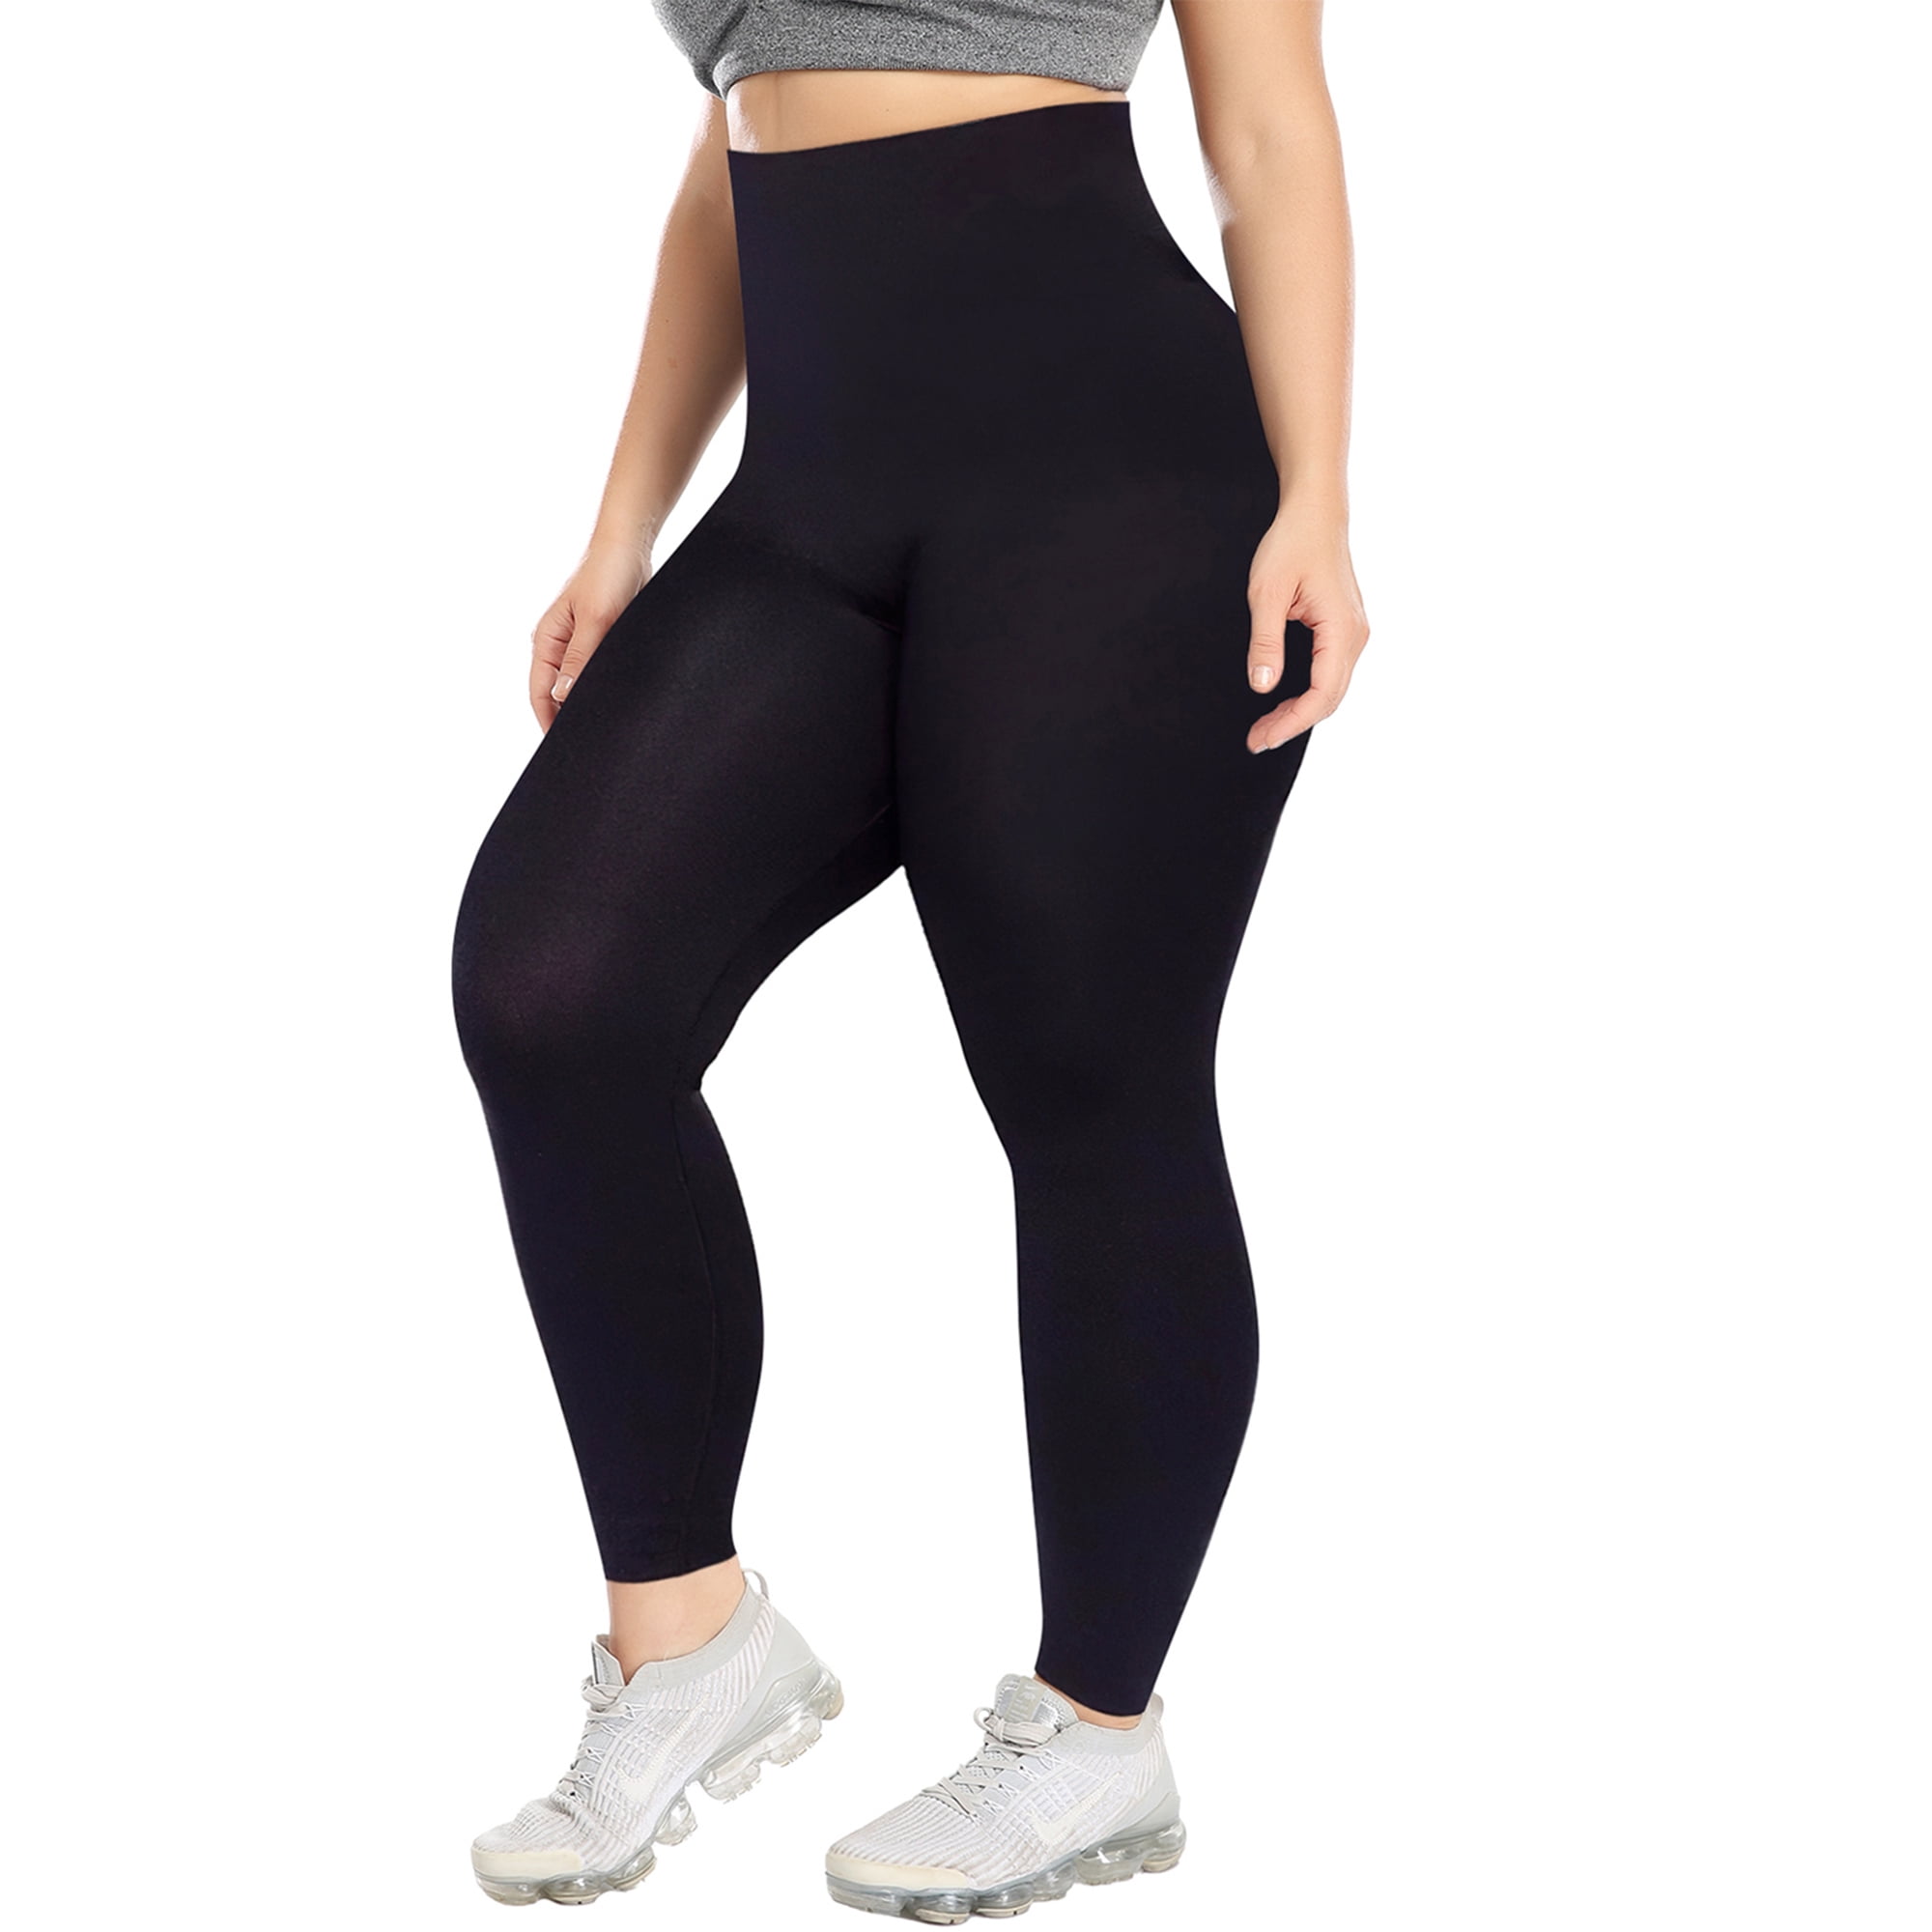 COMFREE 2 Pack High Waist Yoga Pants with Pockets for Women Tummy